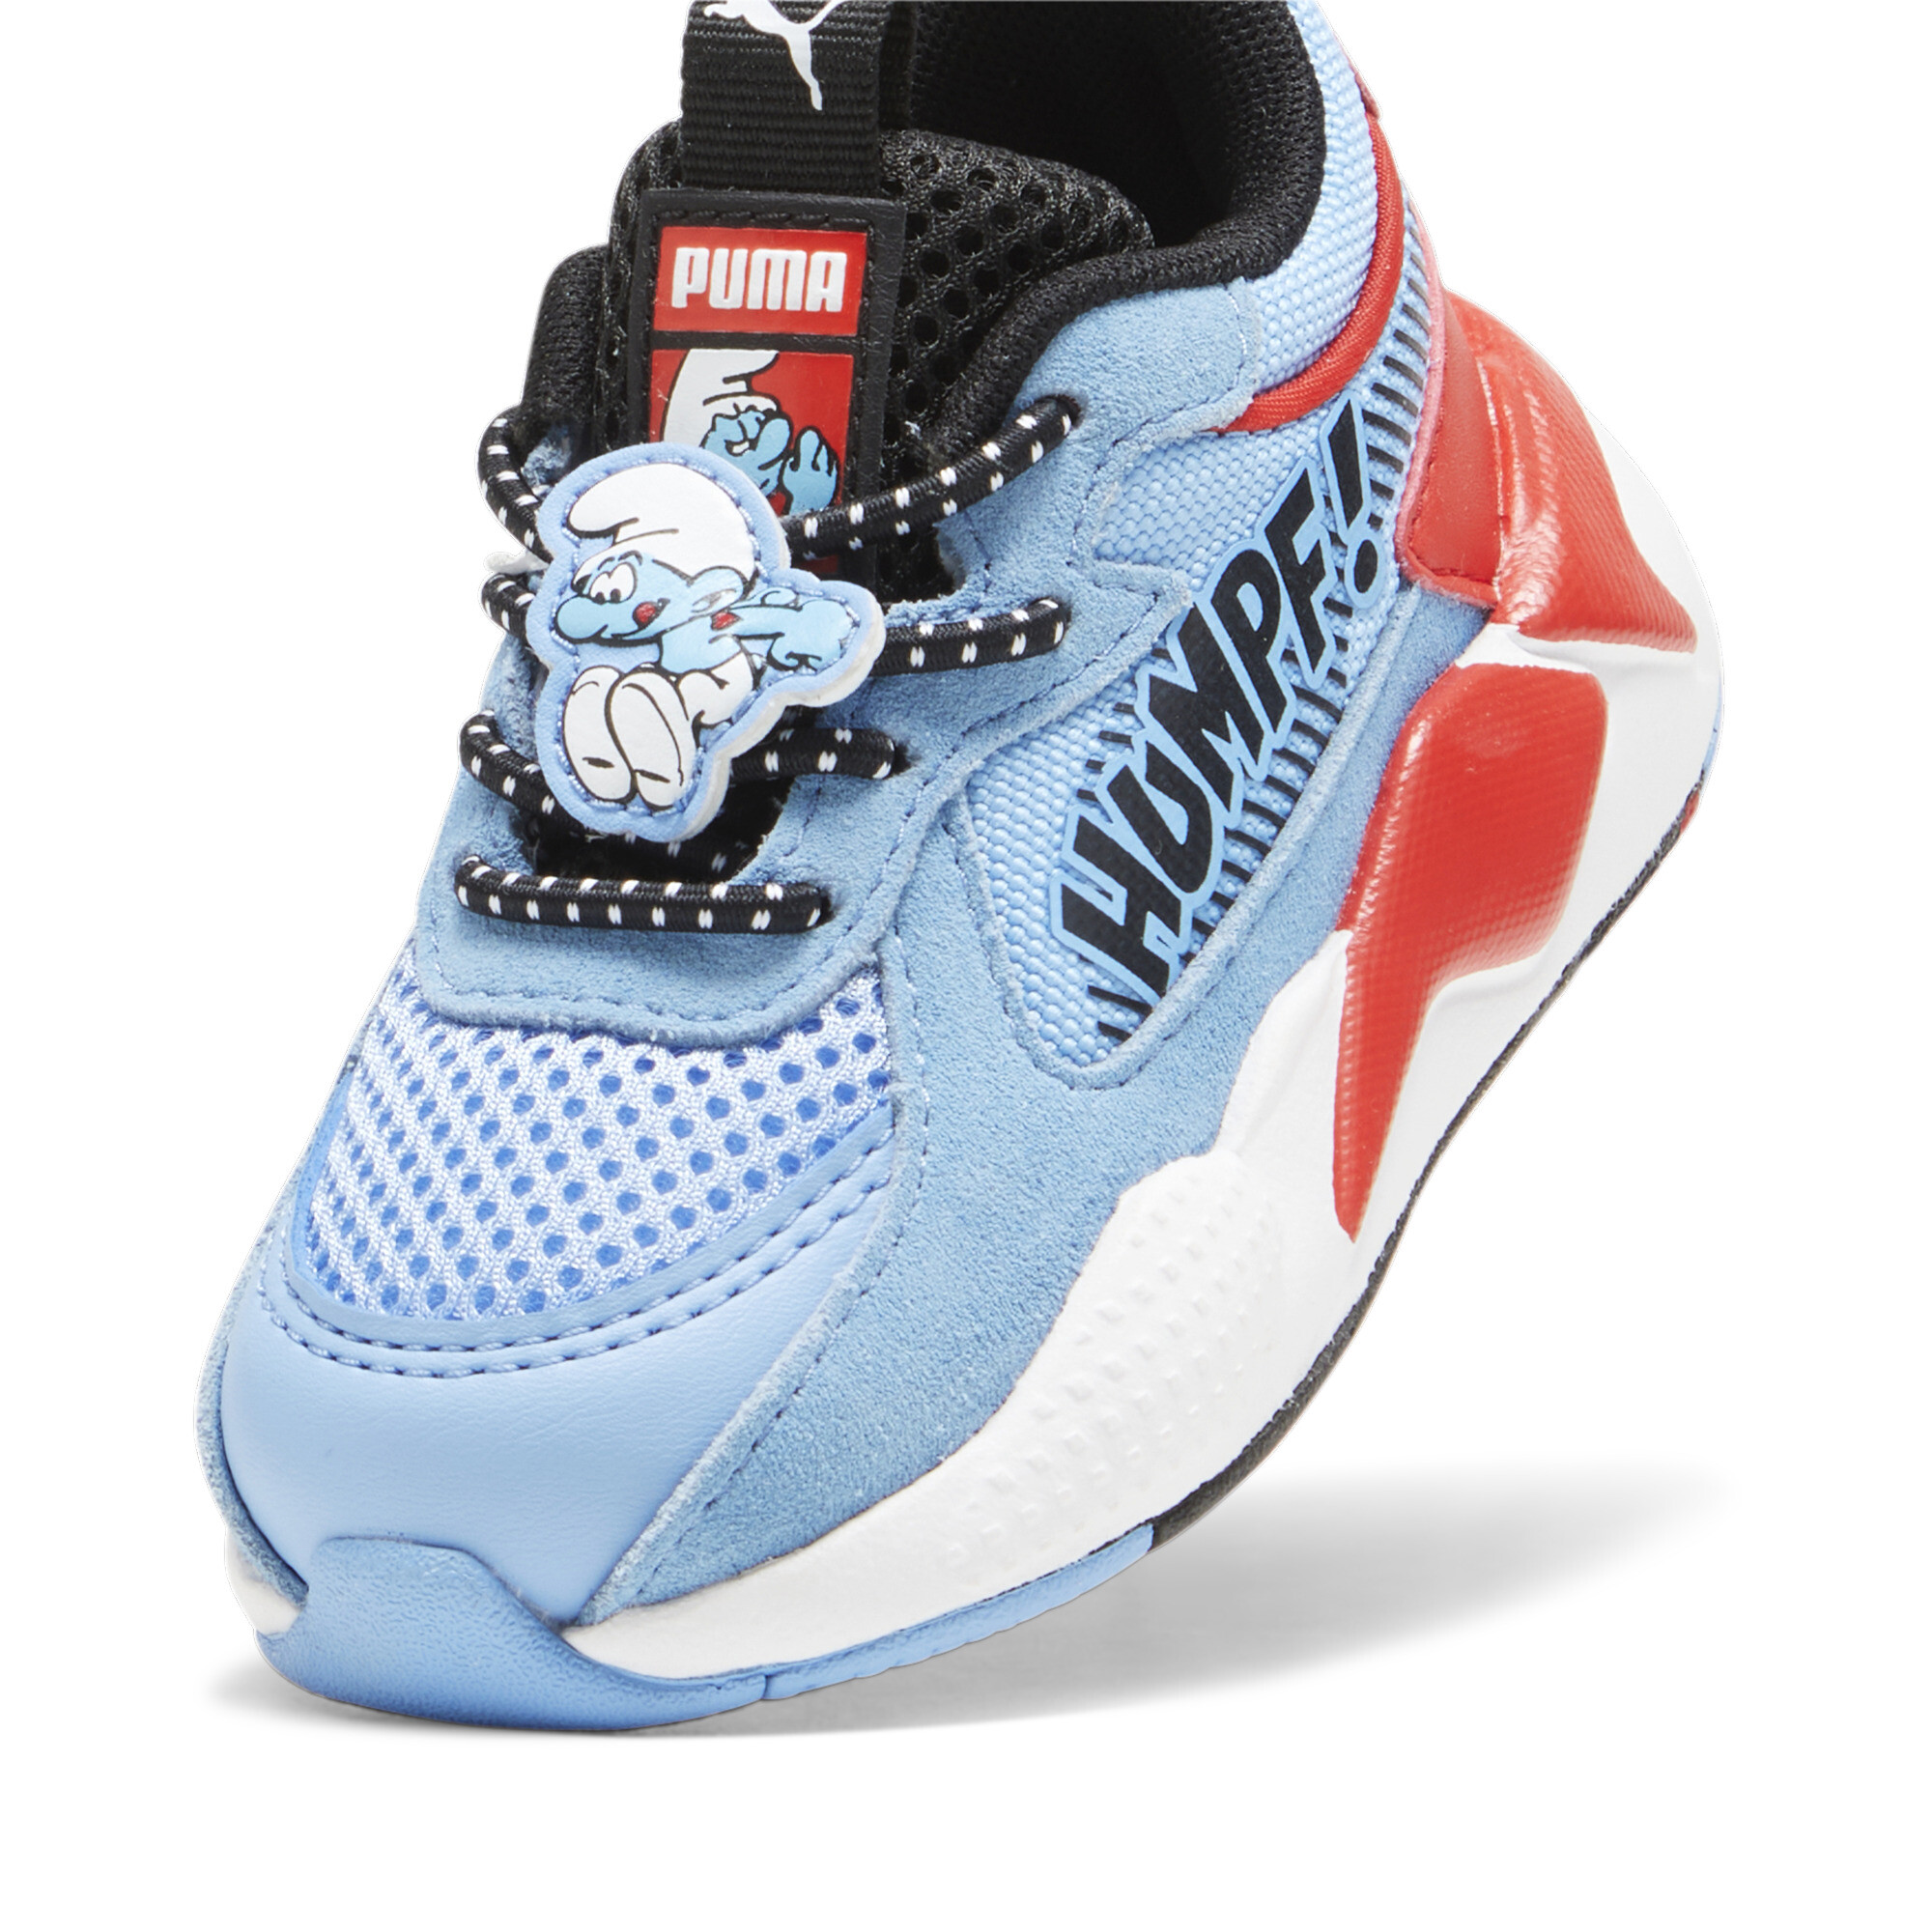 Kids' PUMA X THE SMURFS RS-X Toddlers' Sneakers In Blue, Size EU 19